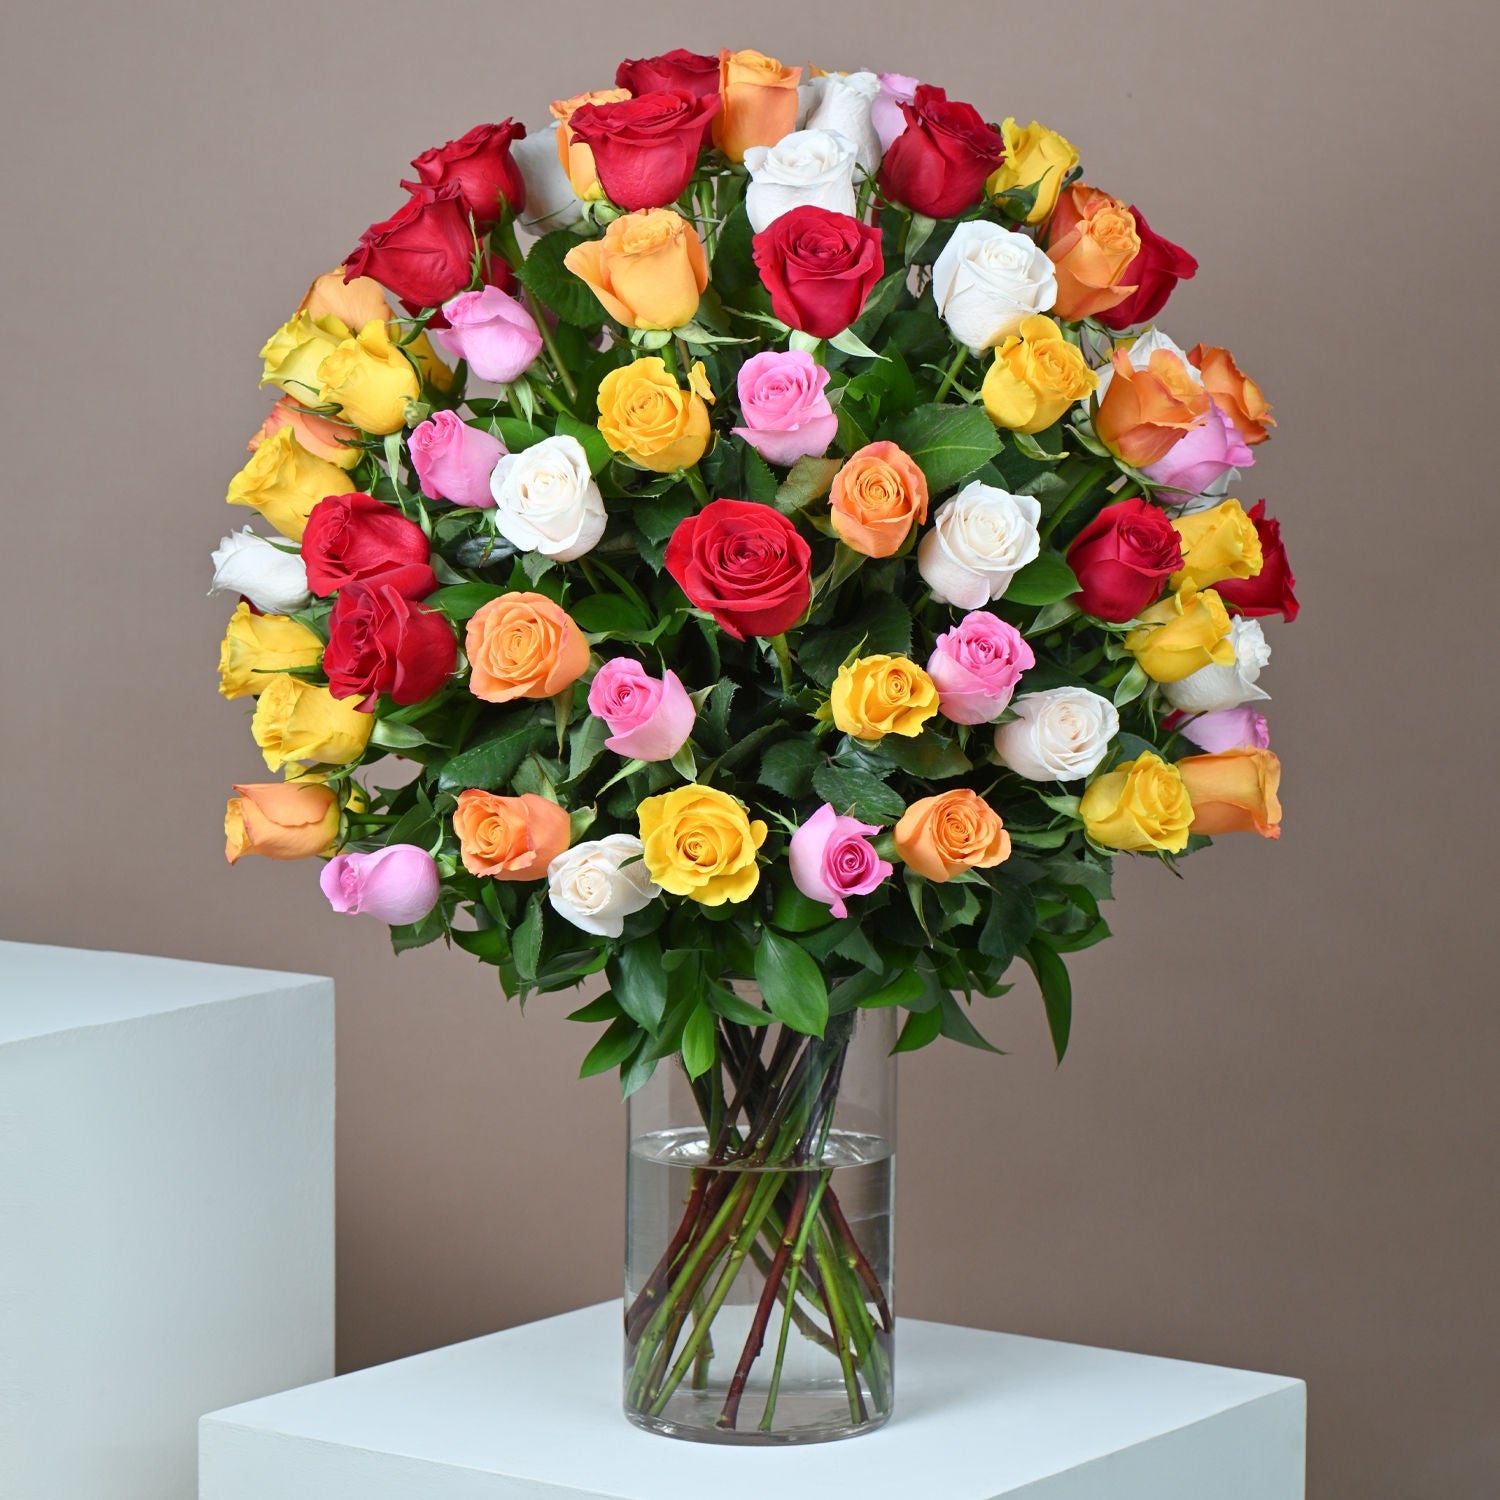 Bunch of 100 Mixed Roses In Glass Vase